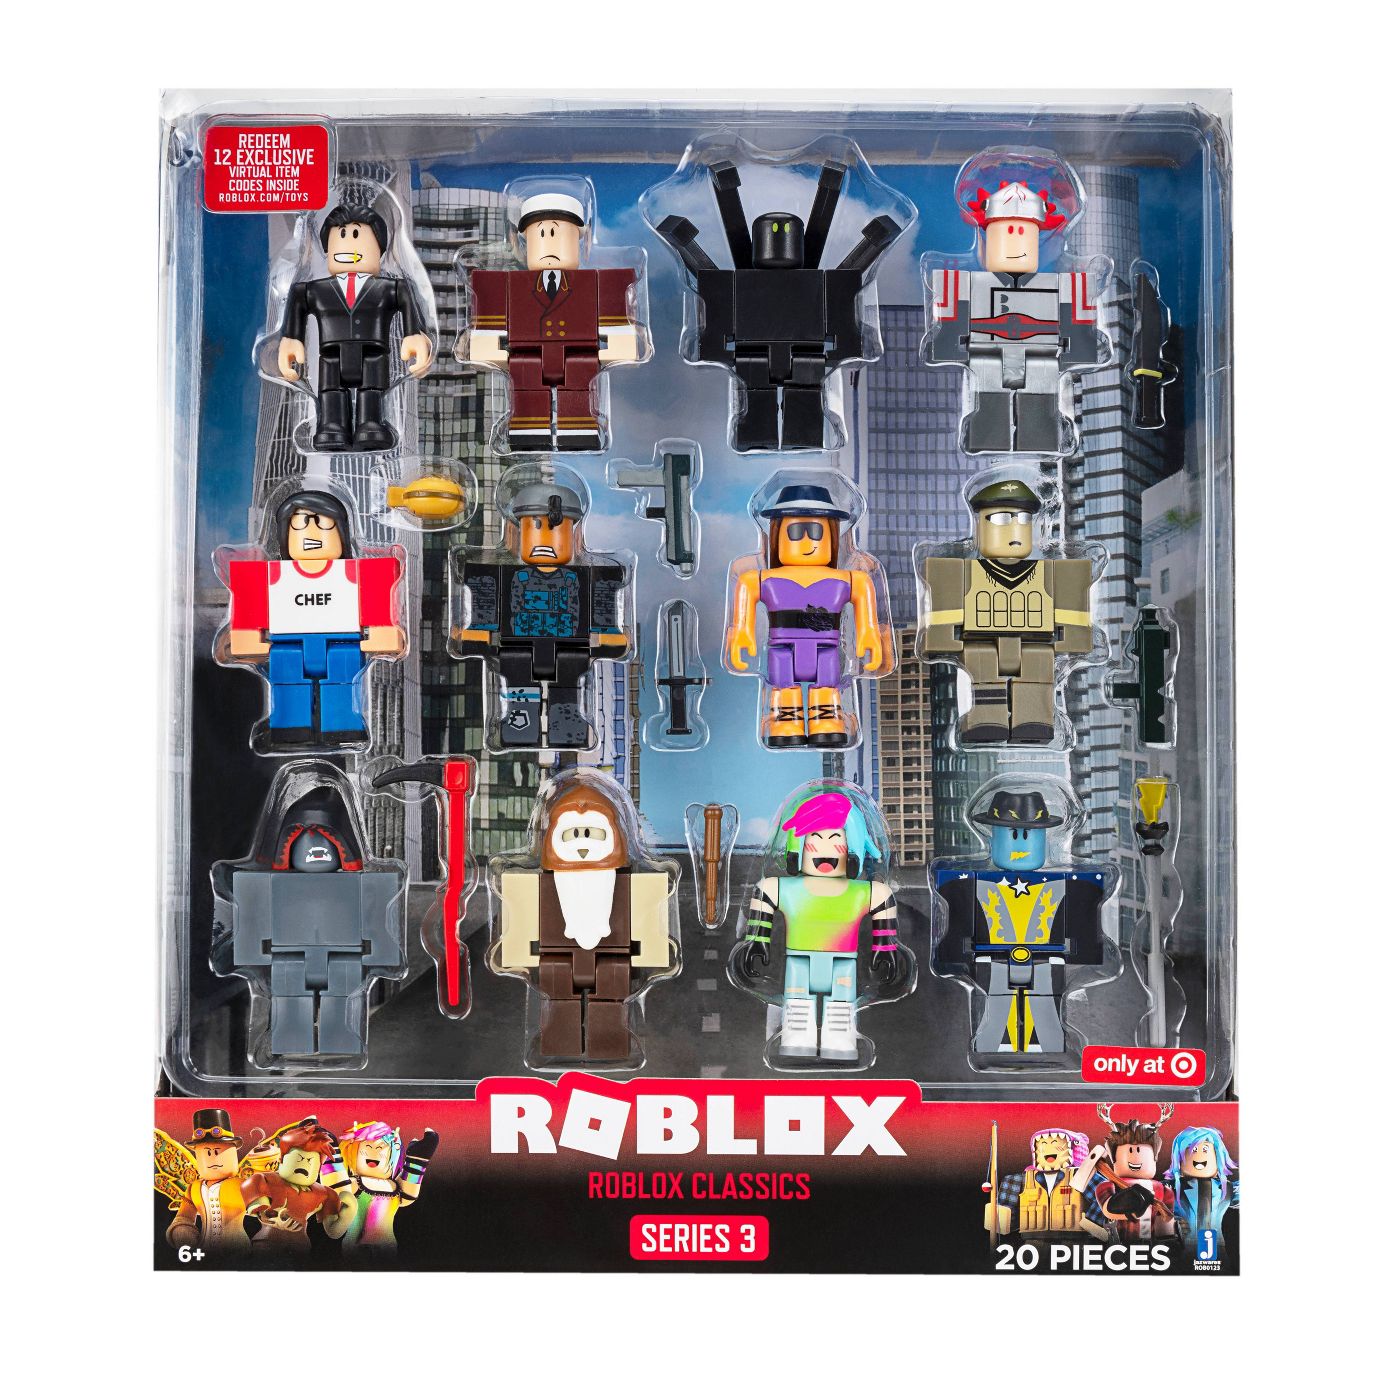 Roblox 12 Mystery Figures Series 3 New Toys Bundle Limited Set Lot 22pc No Codes Action Figures Tv Movie Video Games - what mystery series is assassin in roblox toys